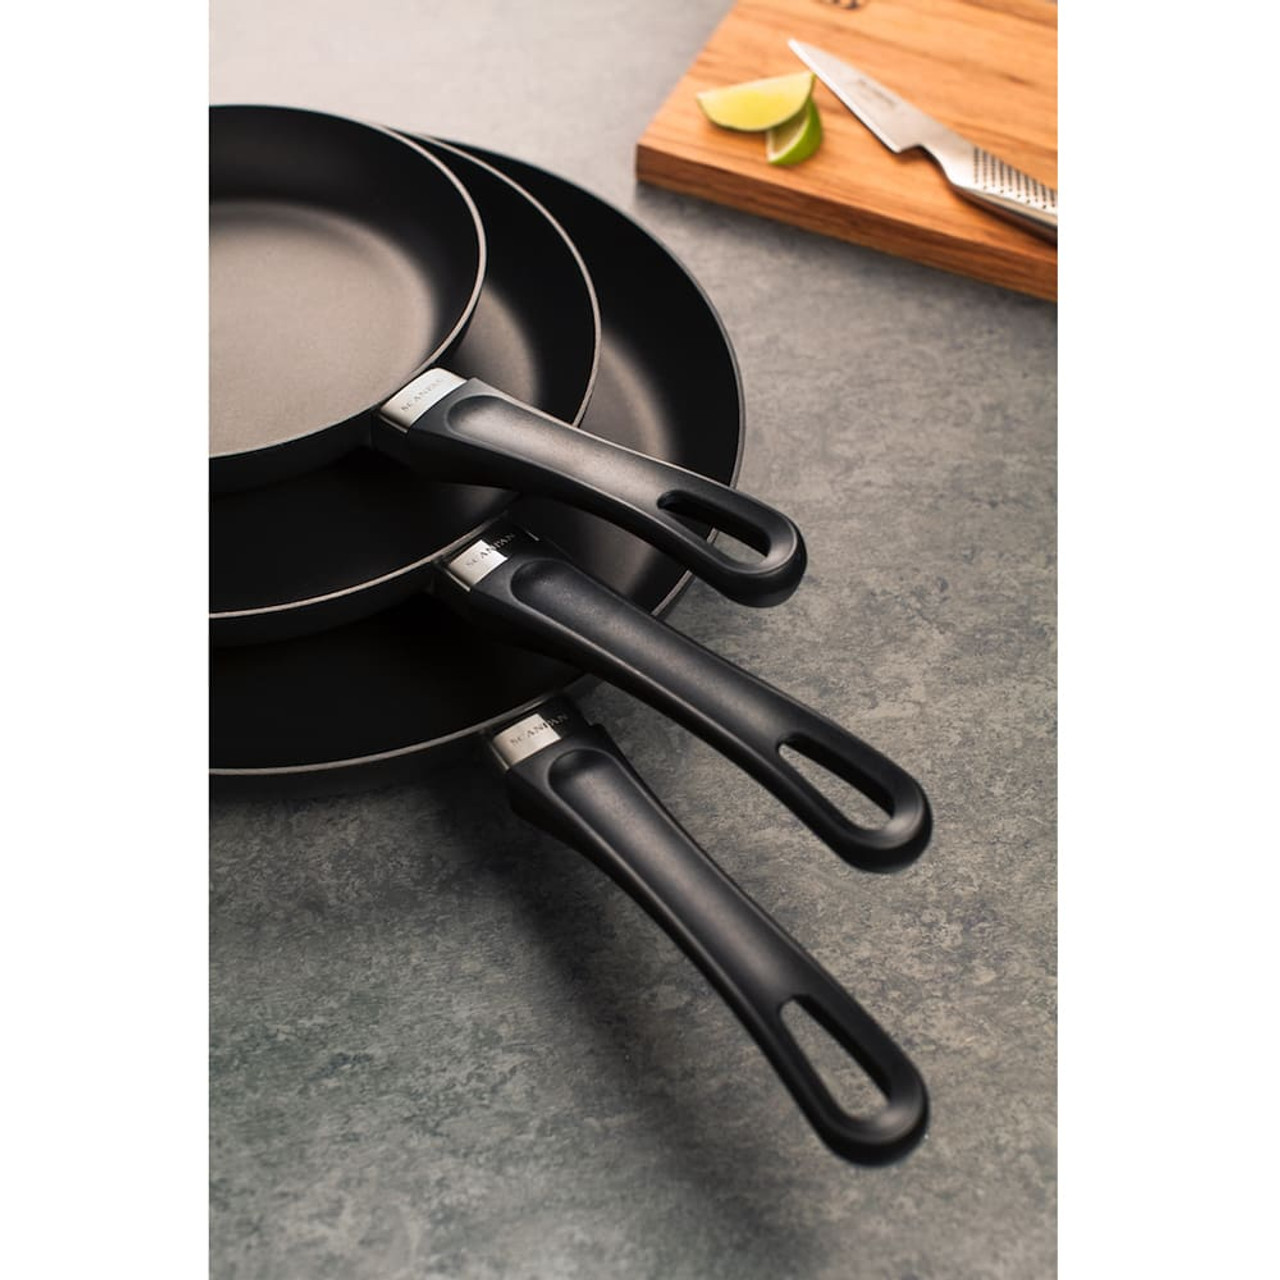 https://cdn11.bigcommerce.com/s-hccytny0od/images/stencil/1280x1280/products/431/4142/scanpan-classic-fry-pan-2__15579.1594068748.jpg?c=2?imbypass=on